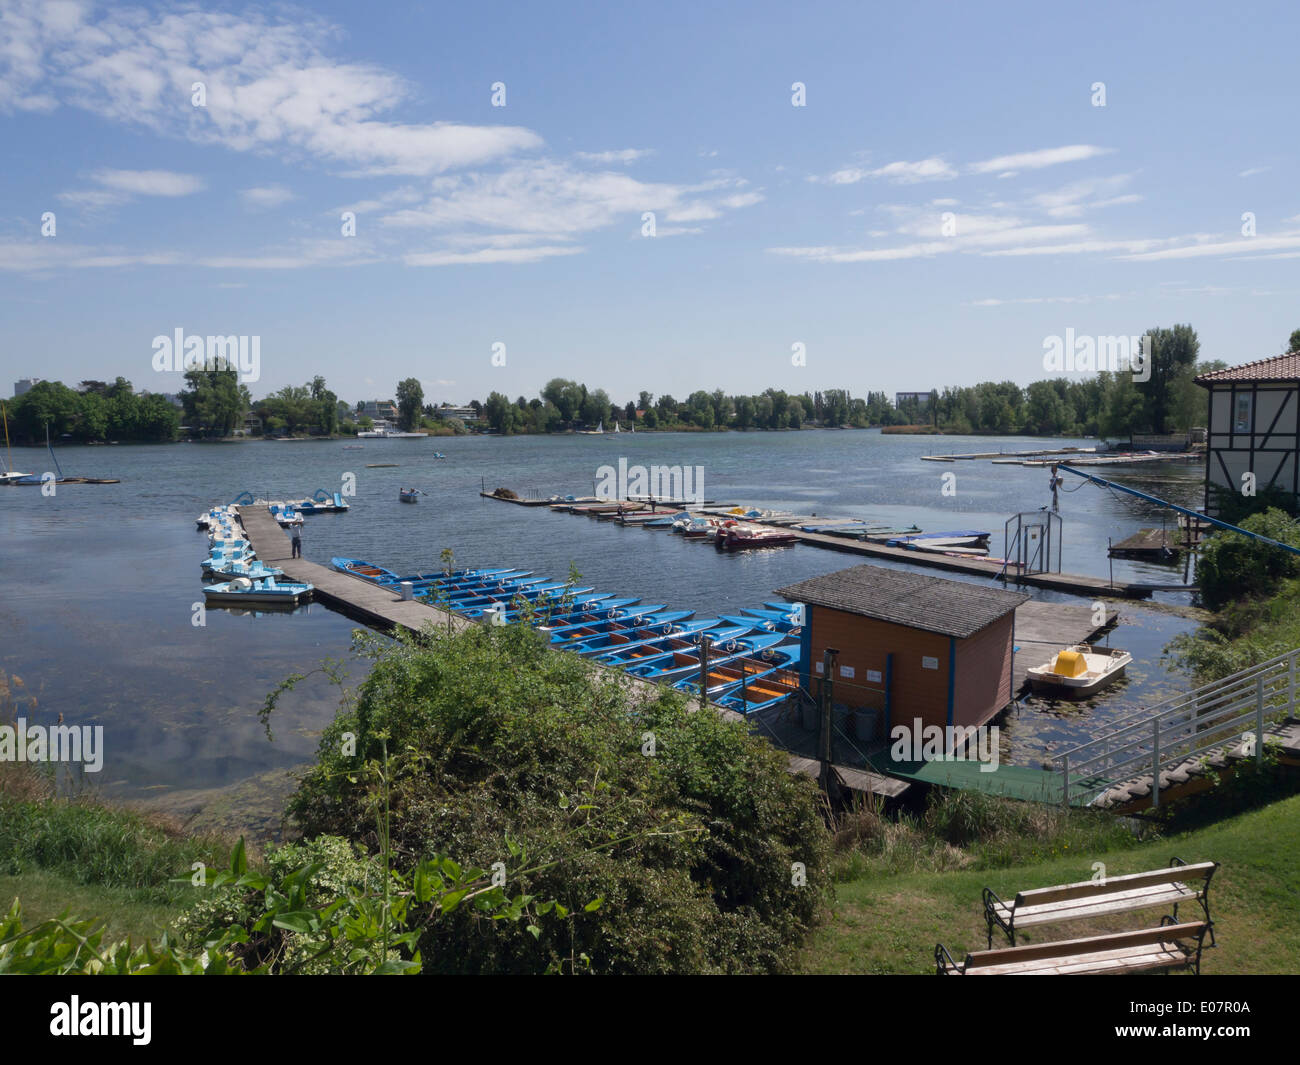 Alte Donau, or Old Danube,in Vienna Austria a lake for swimming, boating, strolling recreation and refreshments in the sun Stock Photo